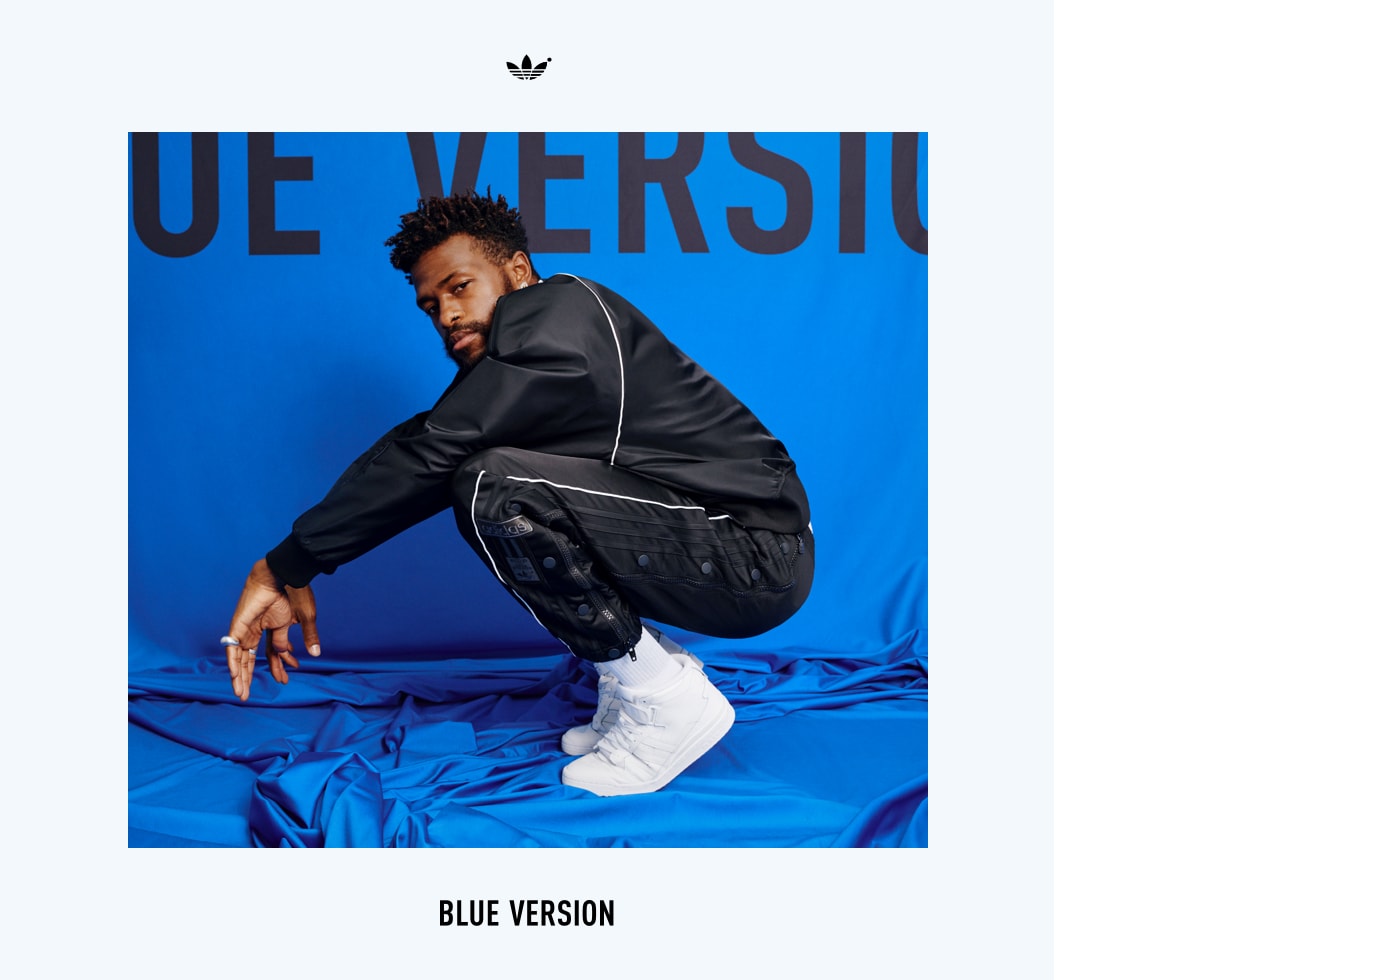 An image of Duckwrth squatting wearing a Blue Version Seefeld track suit in black.